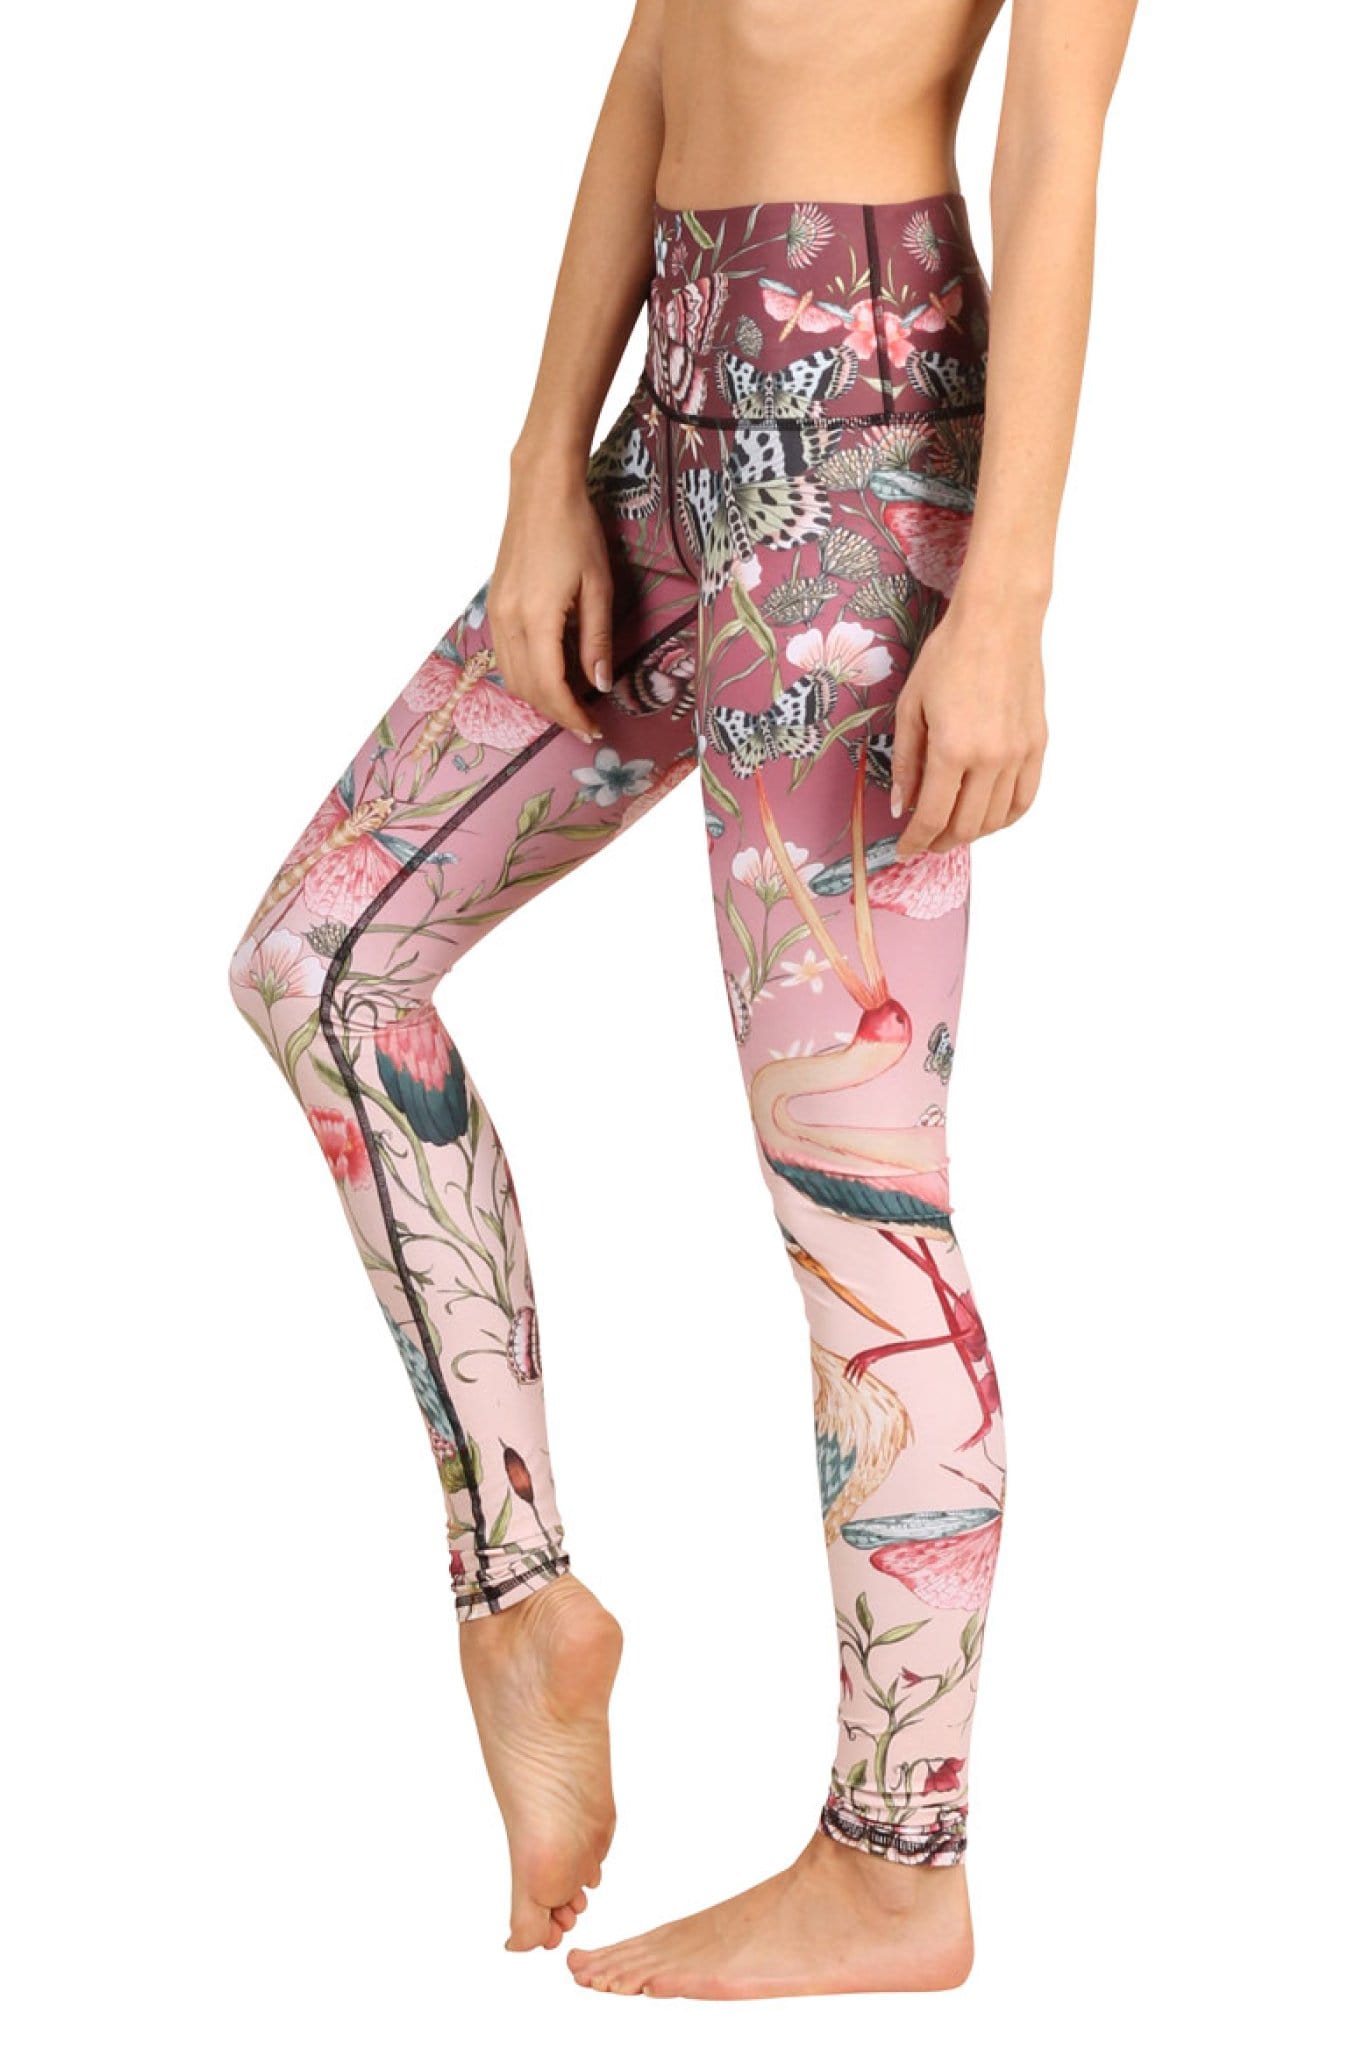 Floral Yoga Pants Booty Push up Pink Printed Leggings Flowers Watercolor  Sportswear Women Activewear Pattern Tights Shaping Sculpting Gym -   Canada